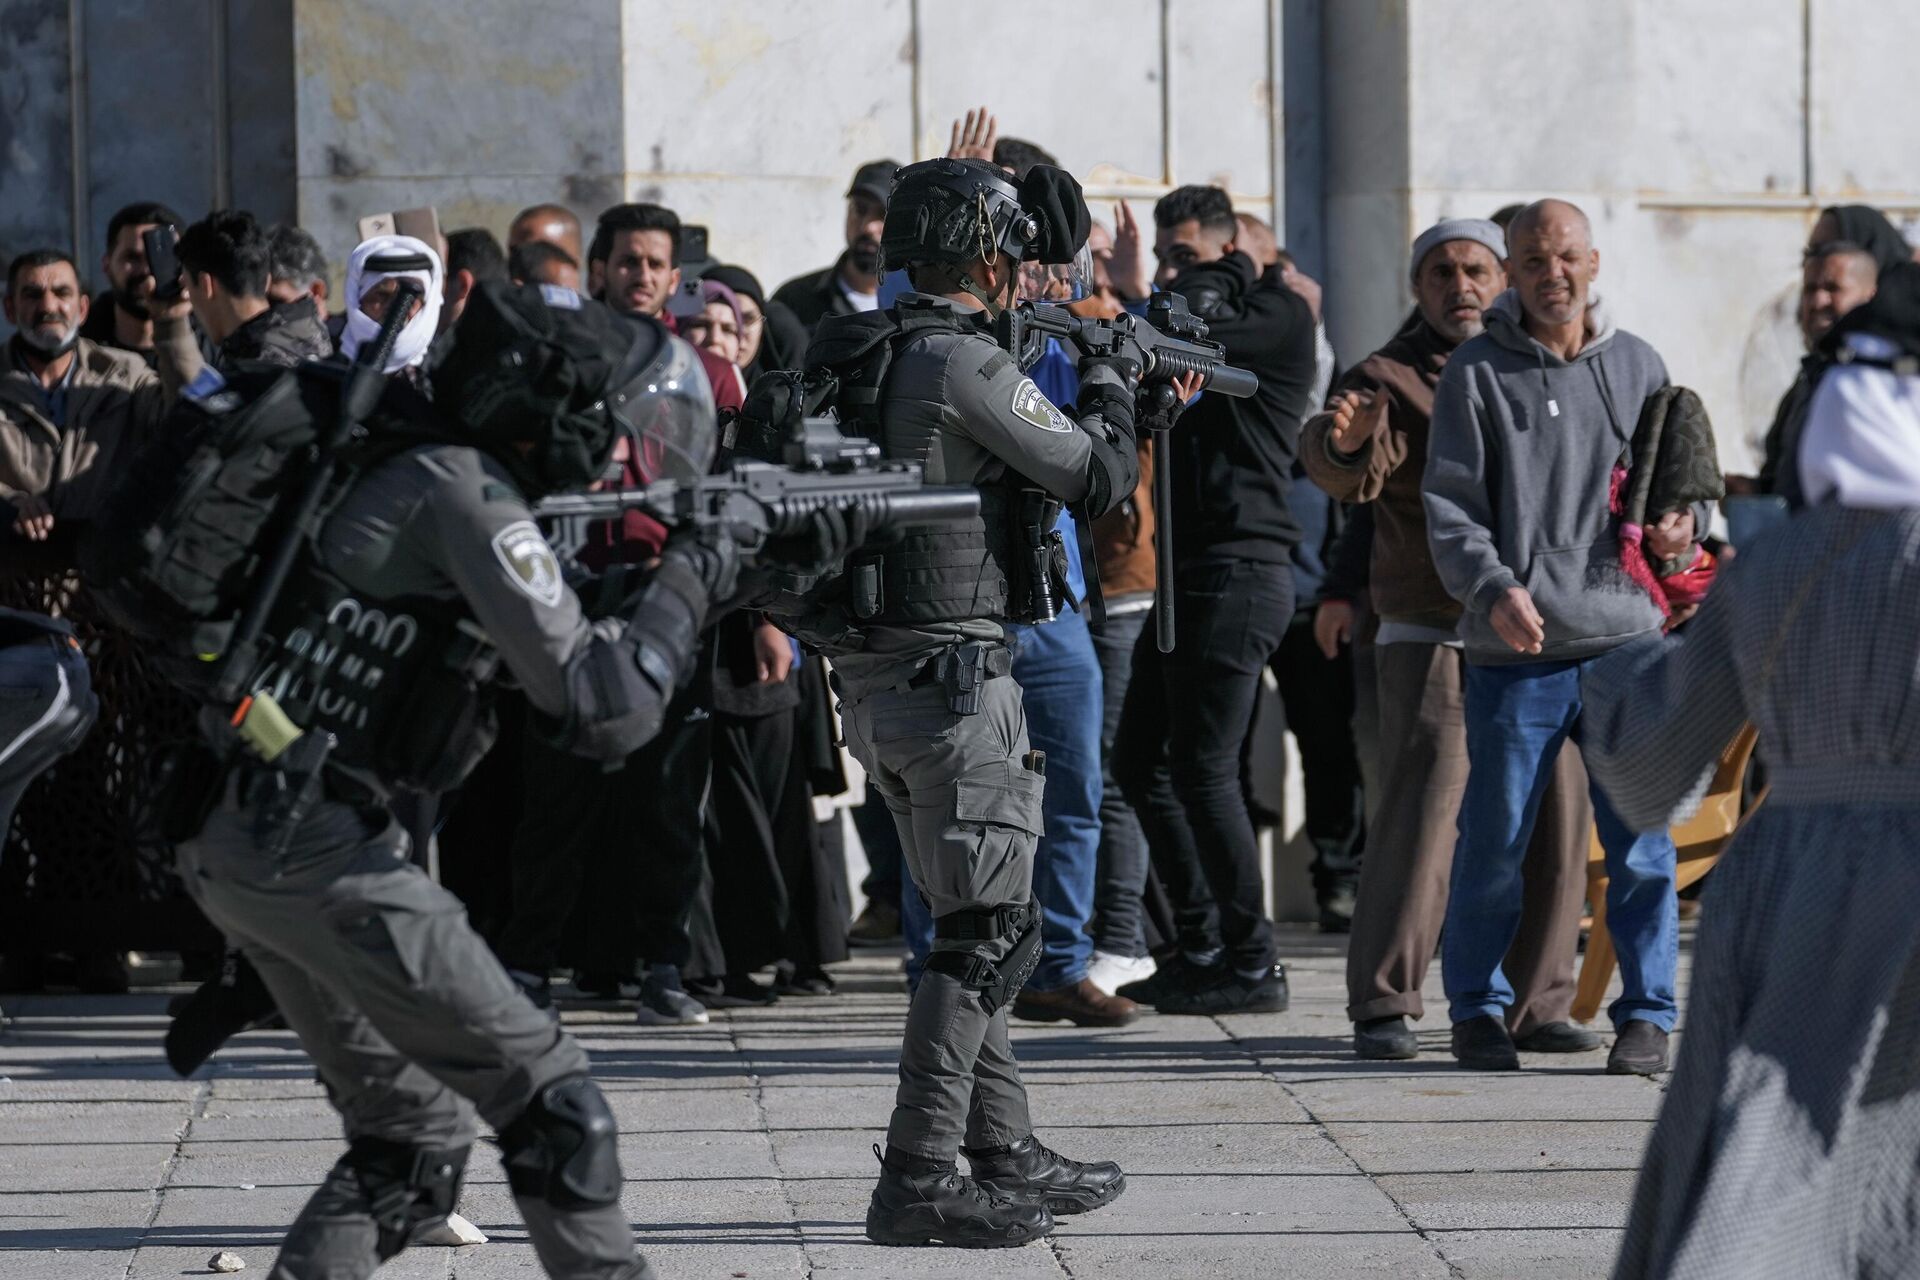 Israeli security forces take position during clashes with Palestinians demonstrators at the Al Aqsa Mosque compound in Jerusalem's Old City, Friday, April 15, 2022. - Sputnik International, 1920, 28.04.2022